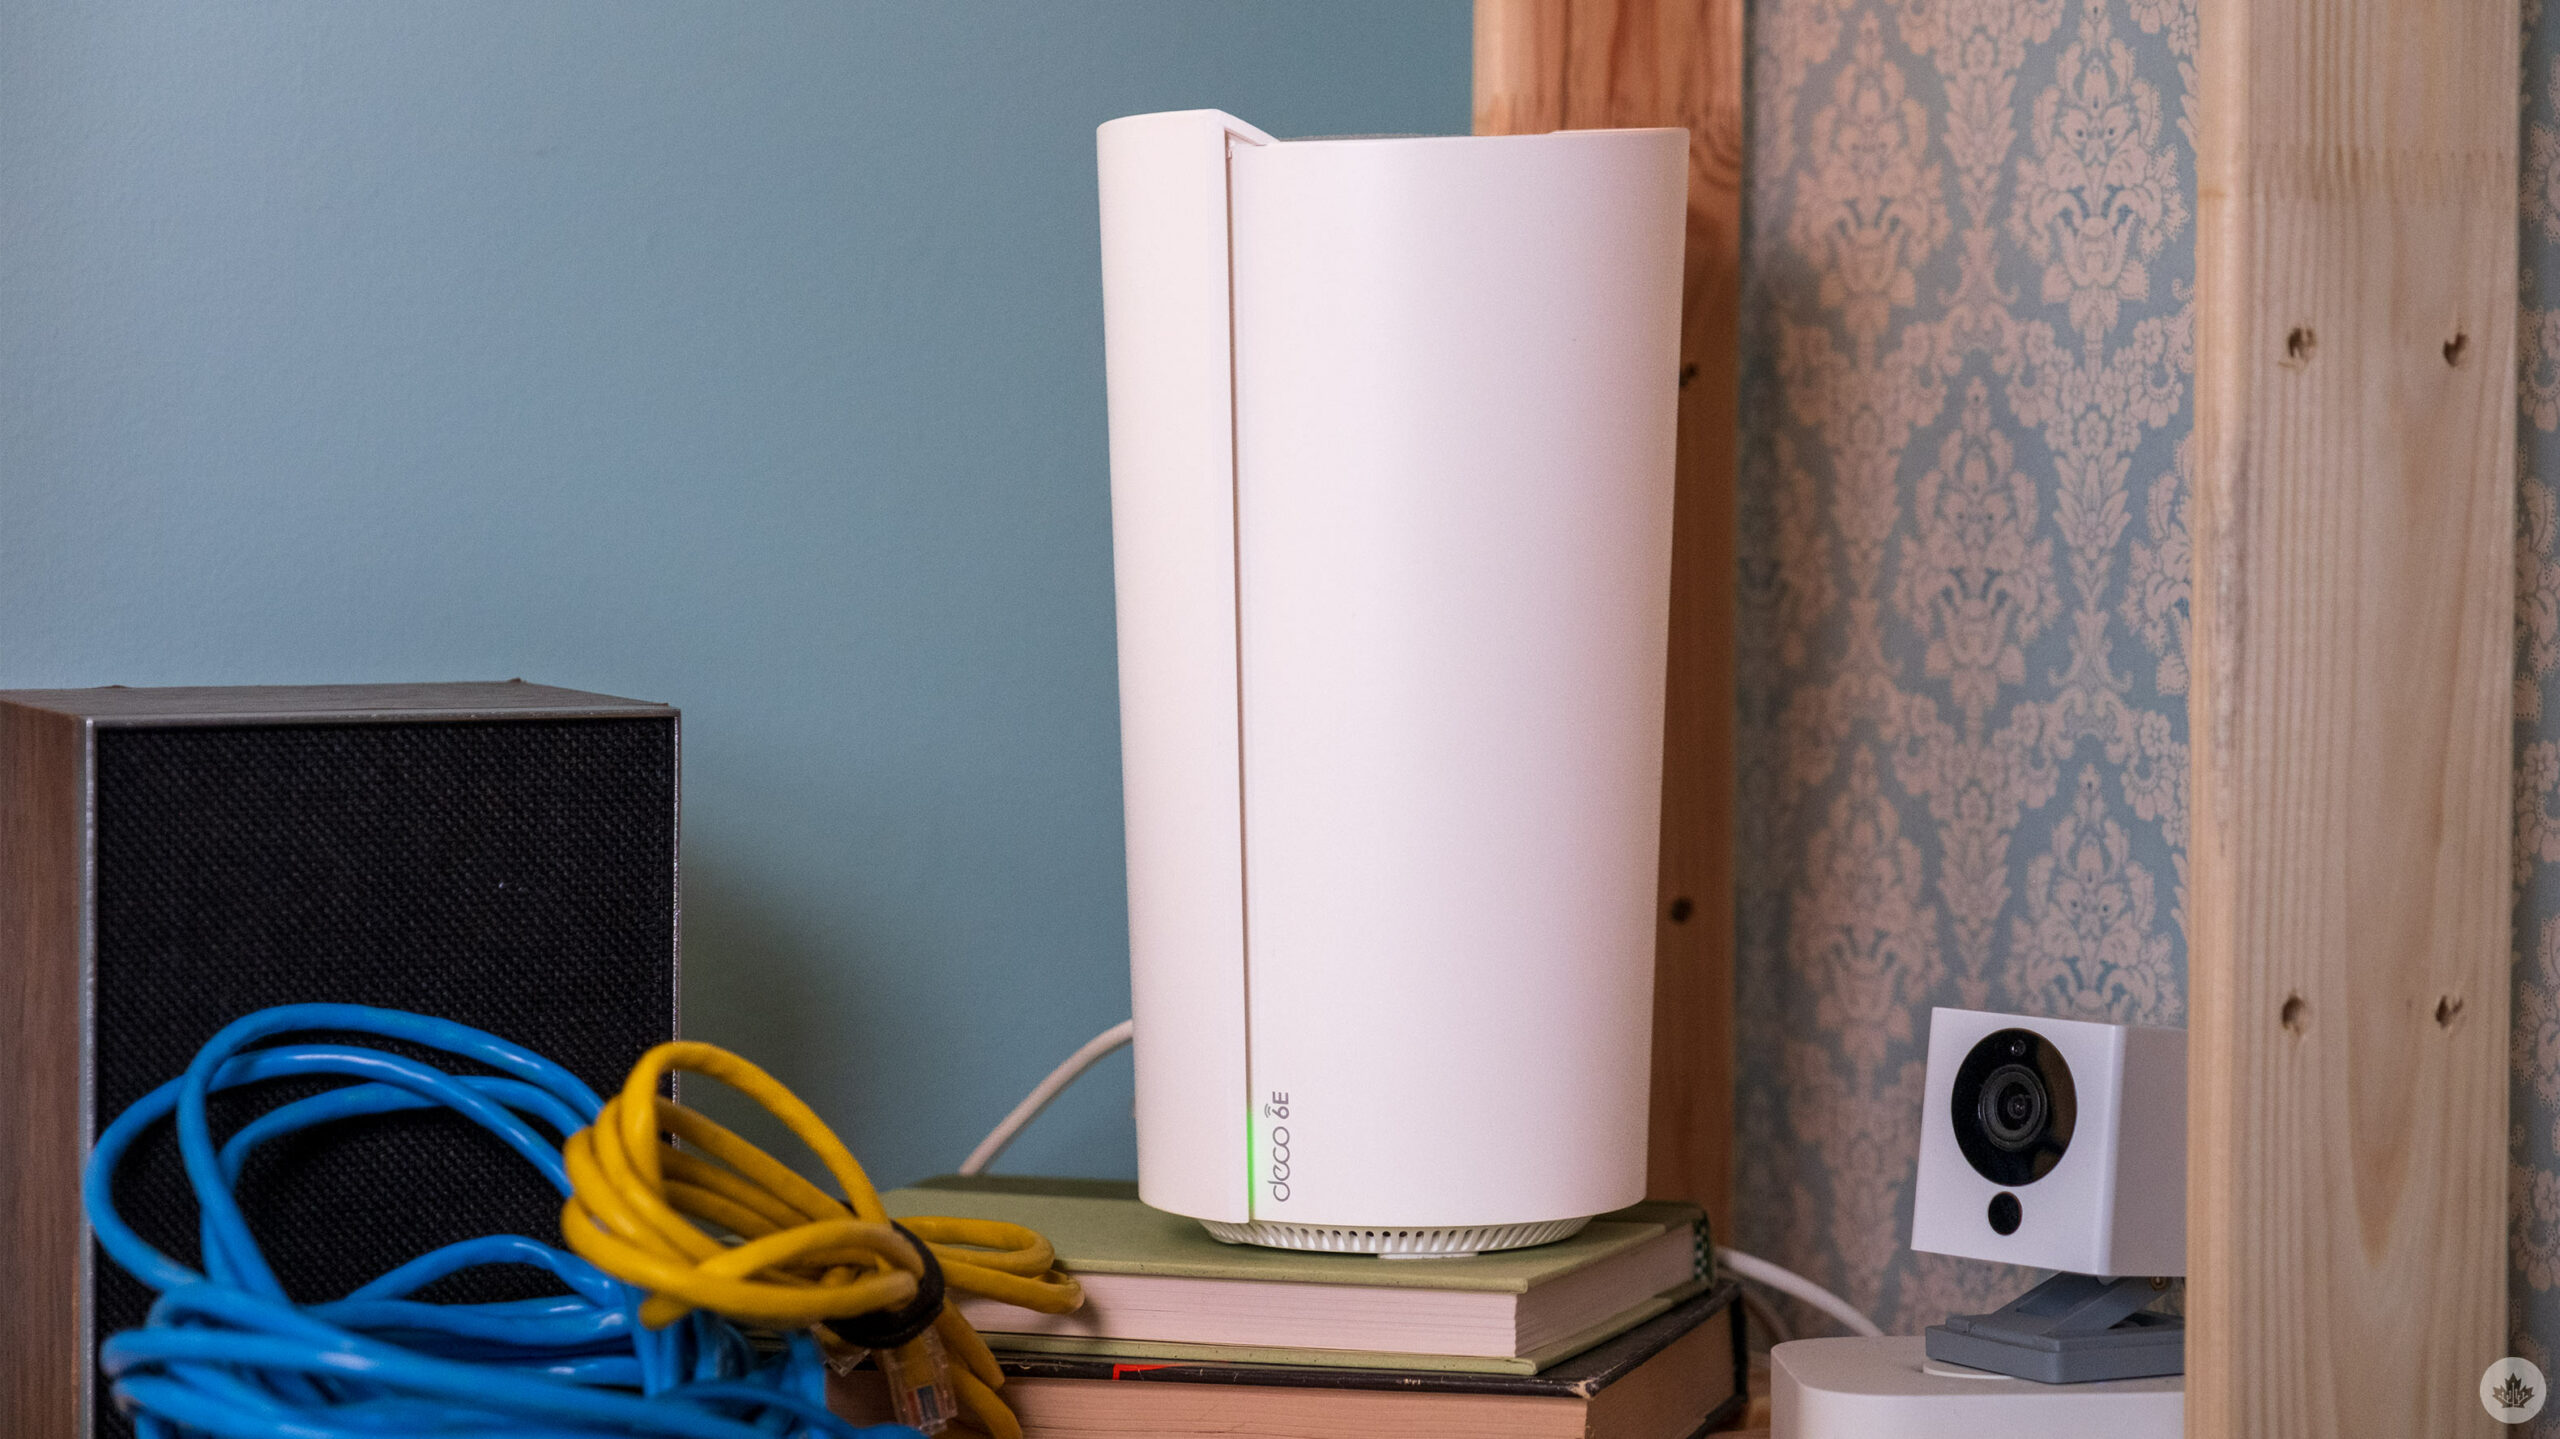 The TP-Link Deco XE200 is the most expensive router I’ve used